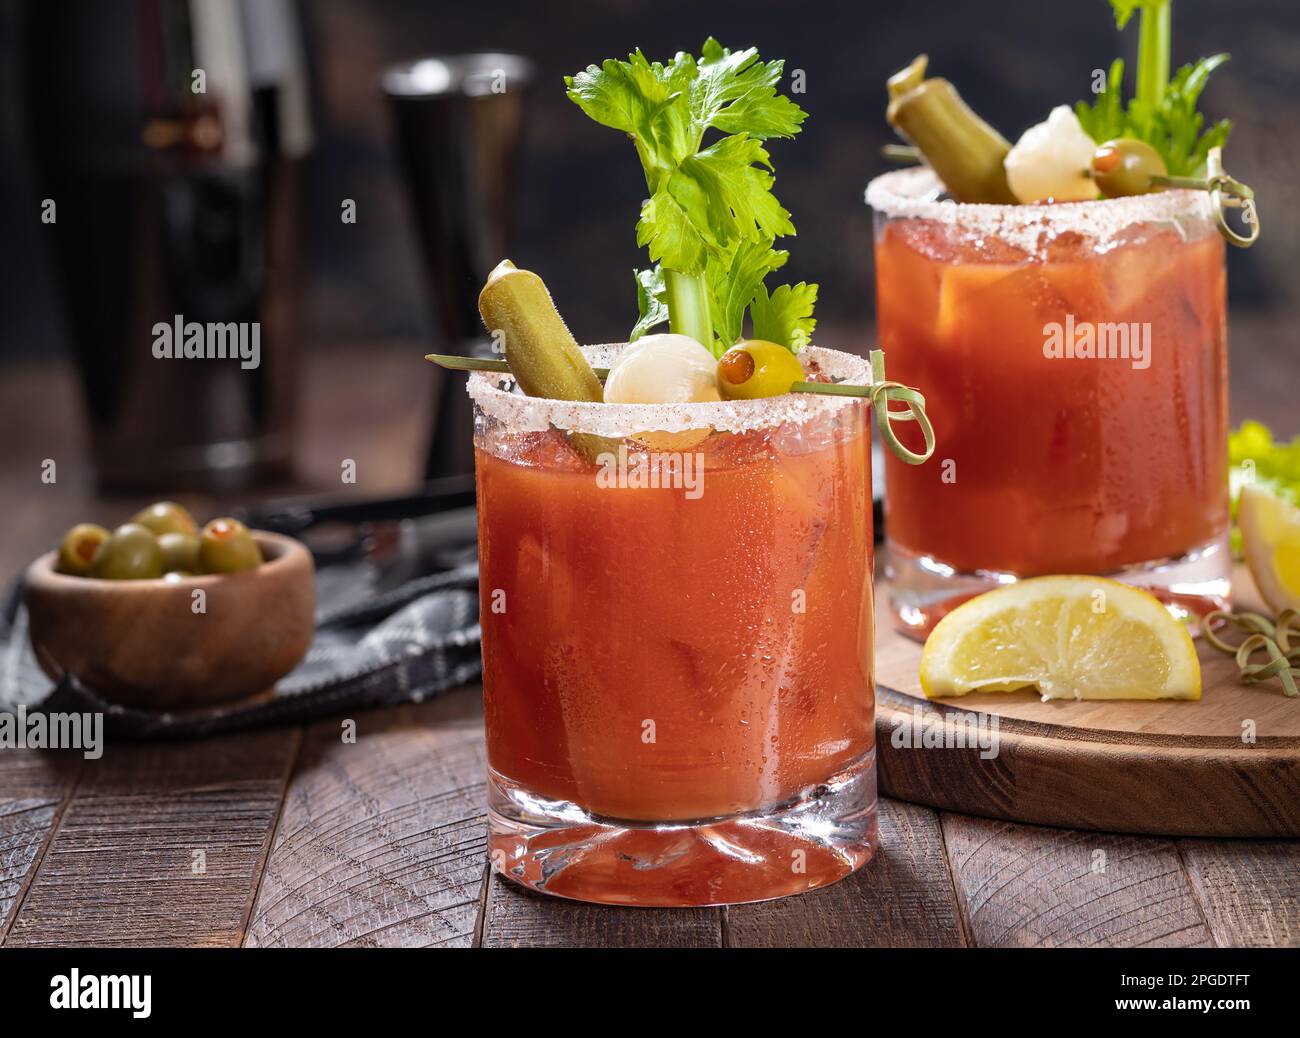 https://c8.alamy.com/comp/2PGDTFT/bloody-mary-cocktail-garnished-with-celery-okra-onion-olive-and-salt-rim-on-a-rustc-wooden-table-2PGDTFT.jpg